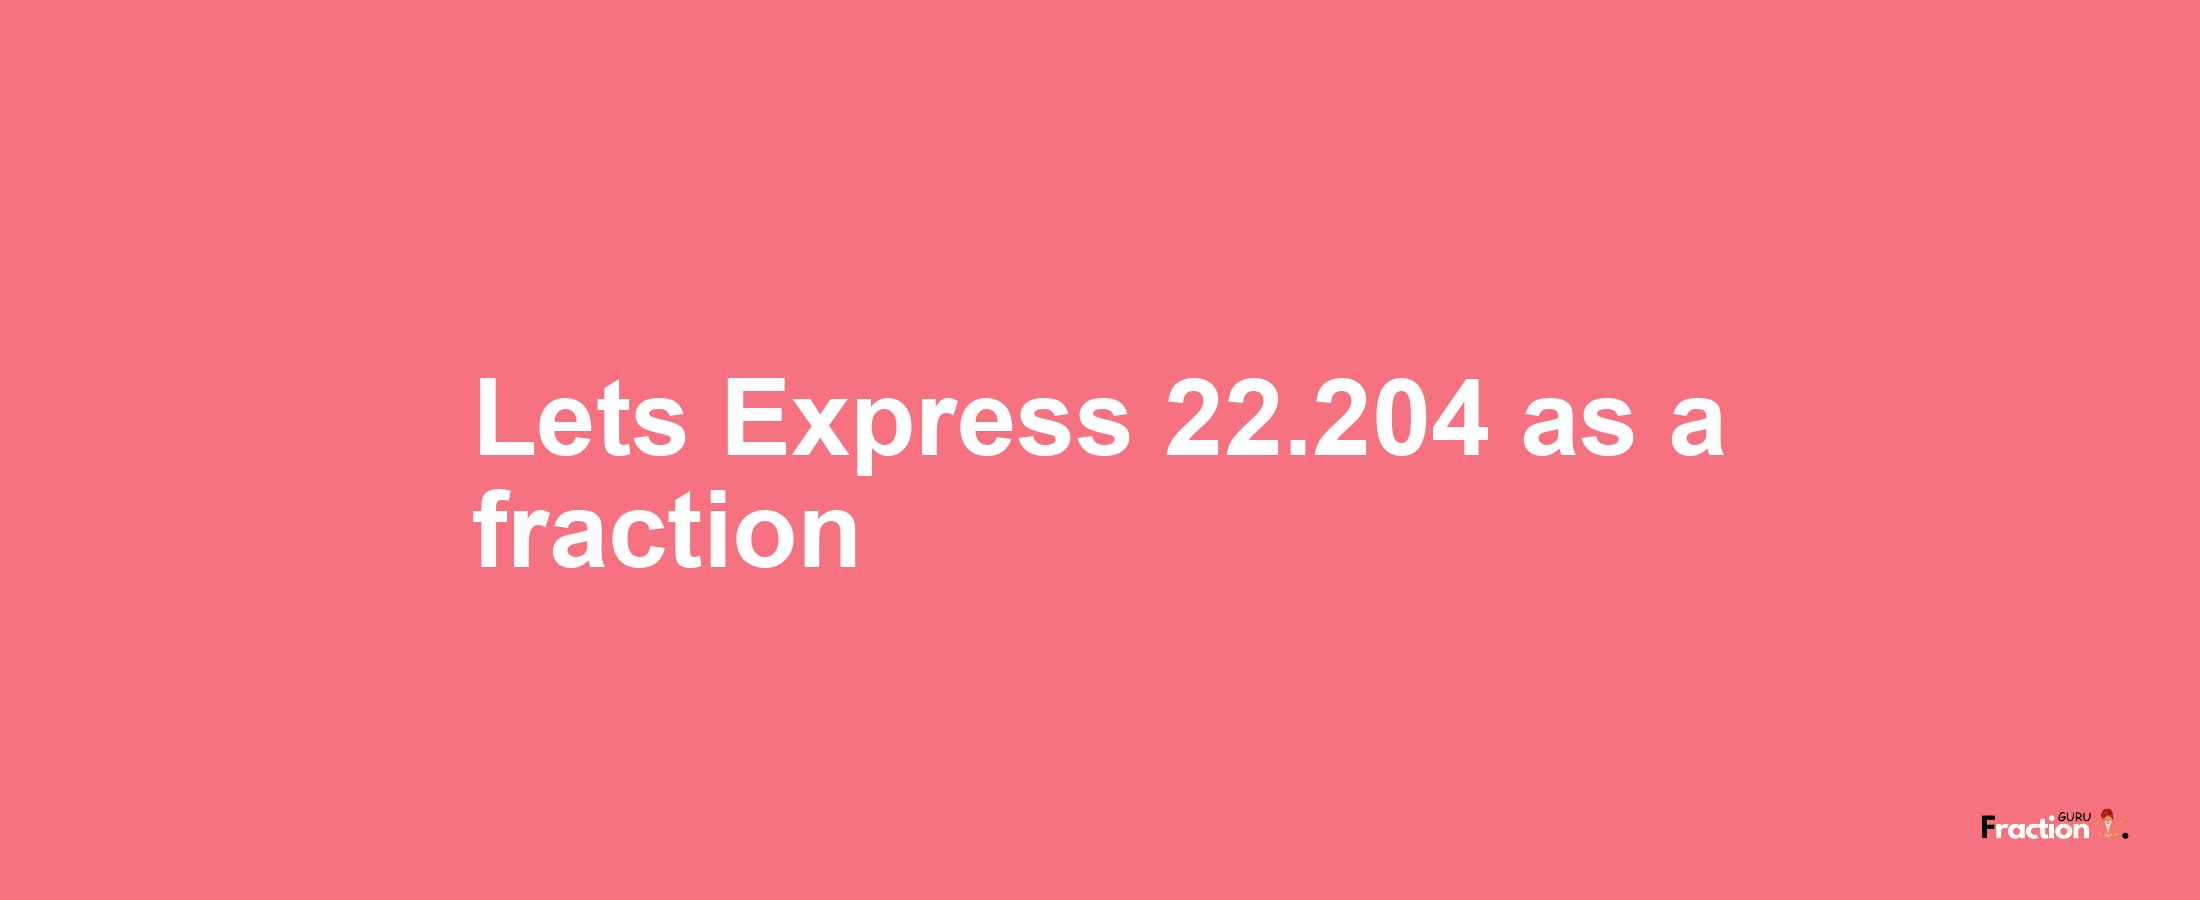 Lets Express 22.204 as afraction